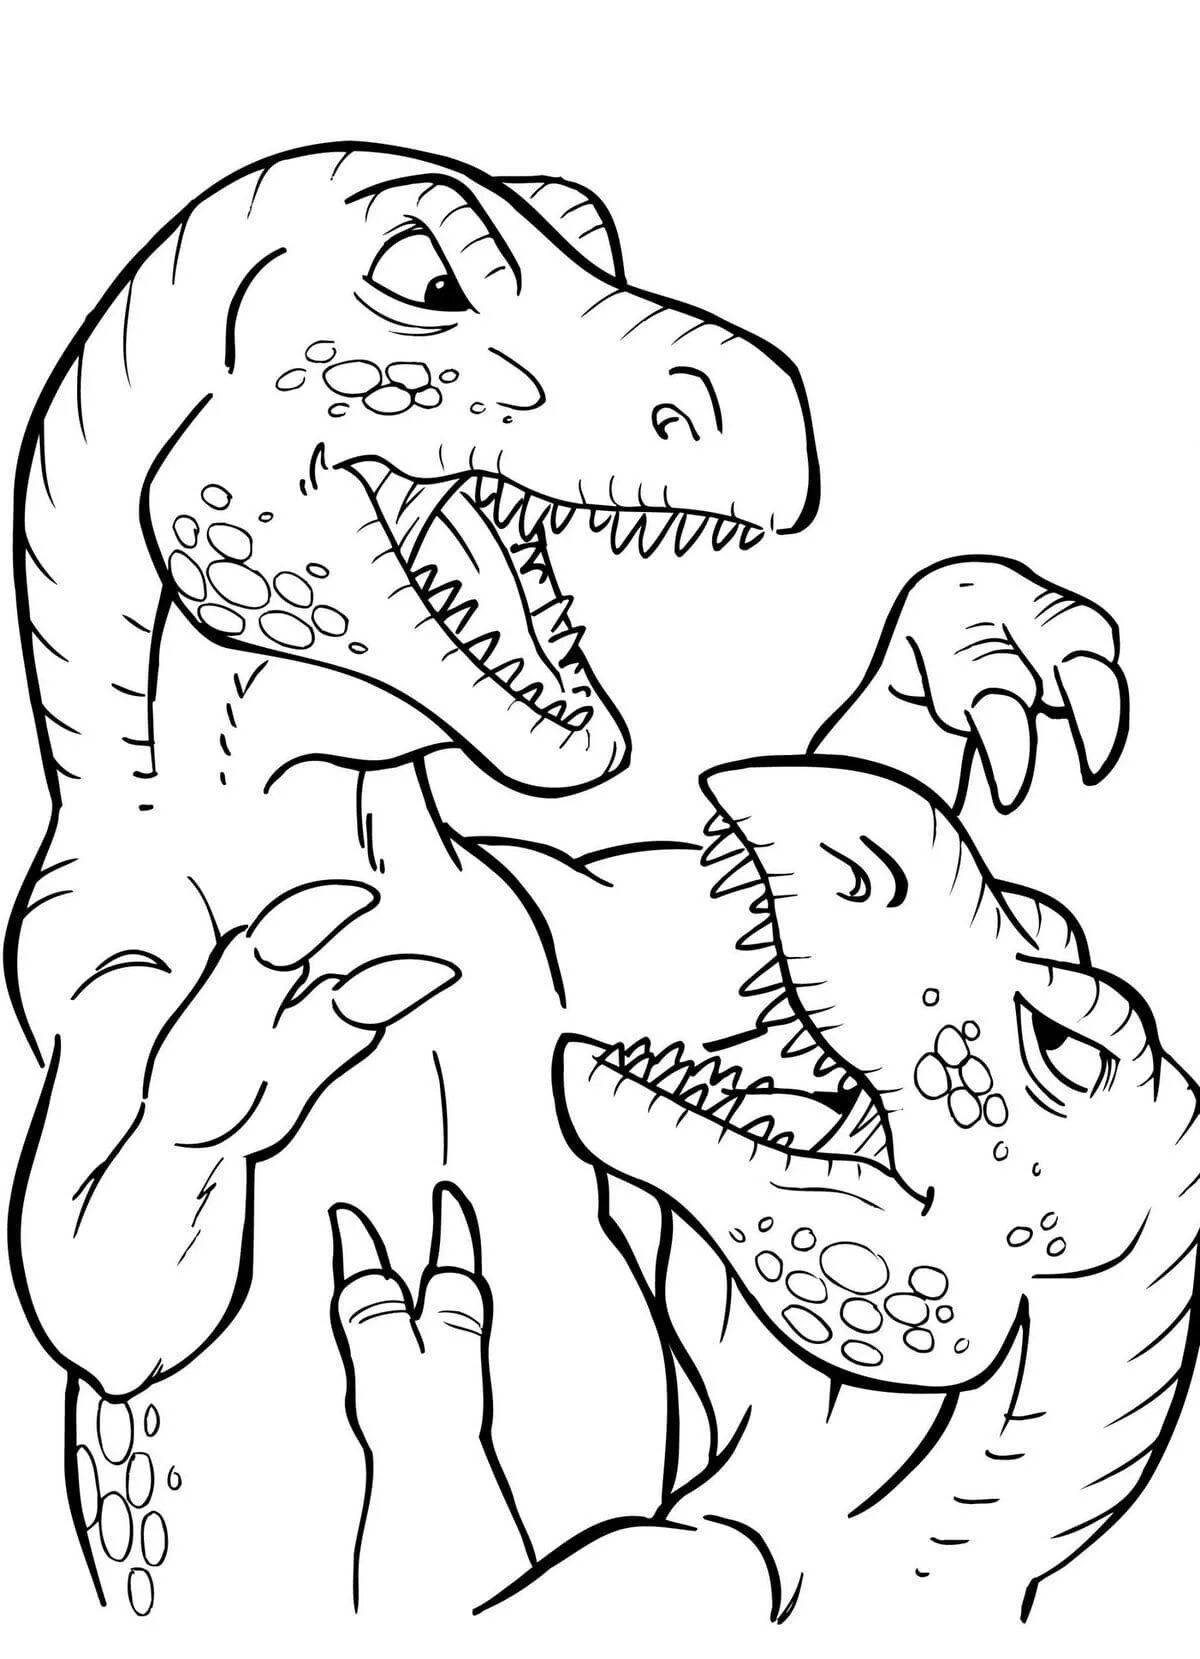 Tyrannosaurus Rex Live Coloring for Kids